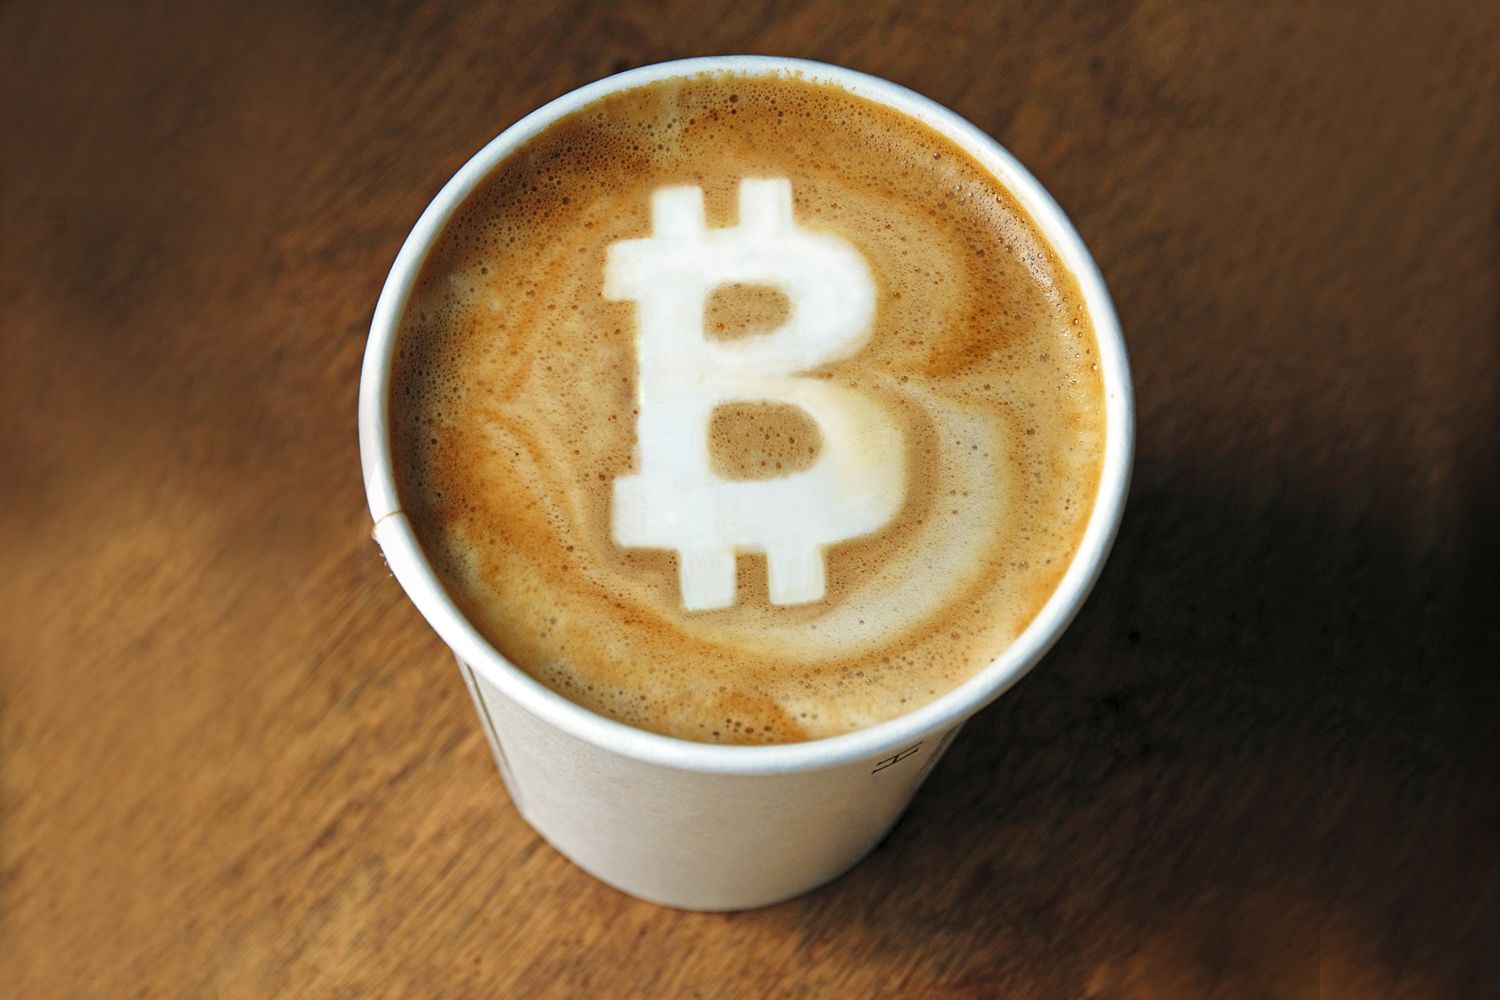 Can I pay with Bitcoin for my latte?